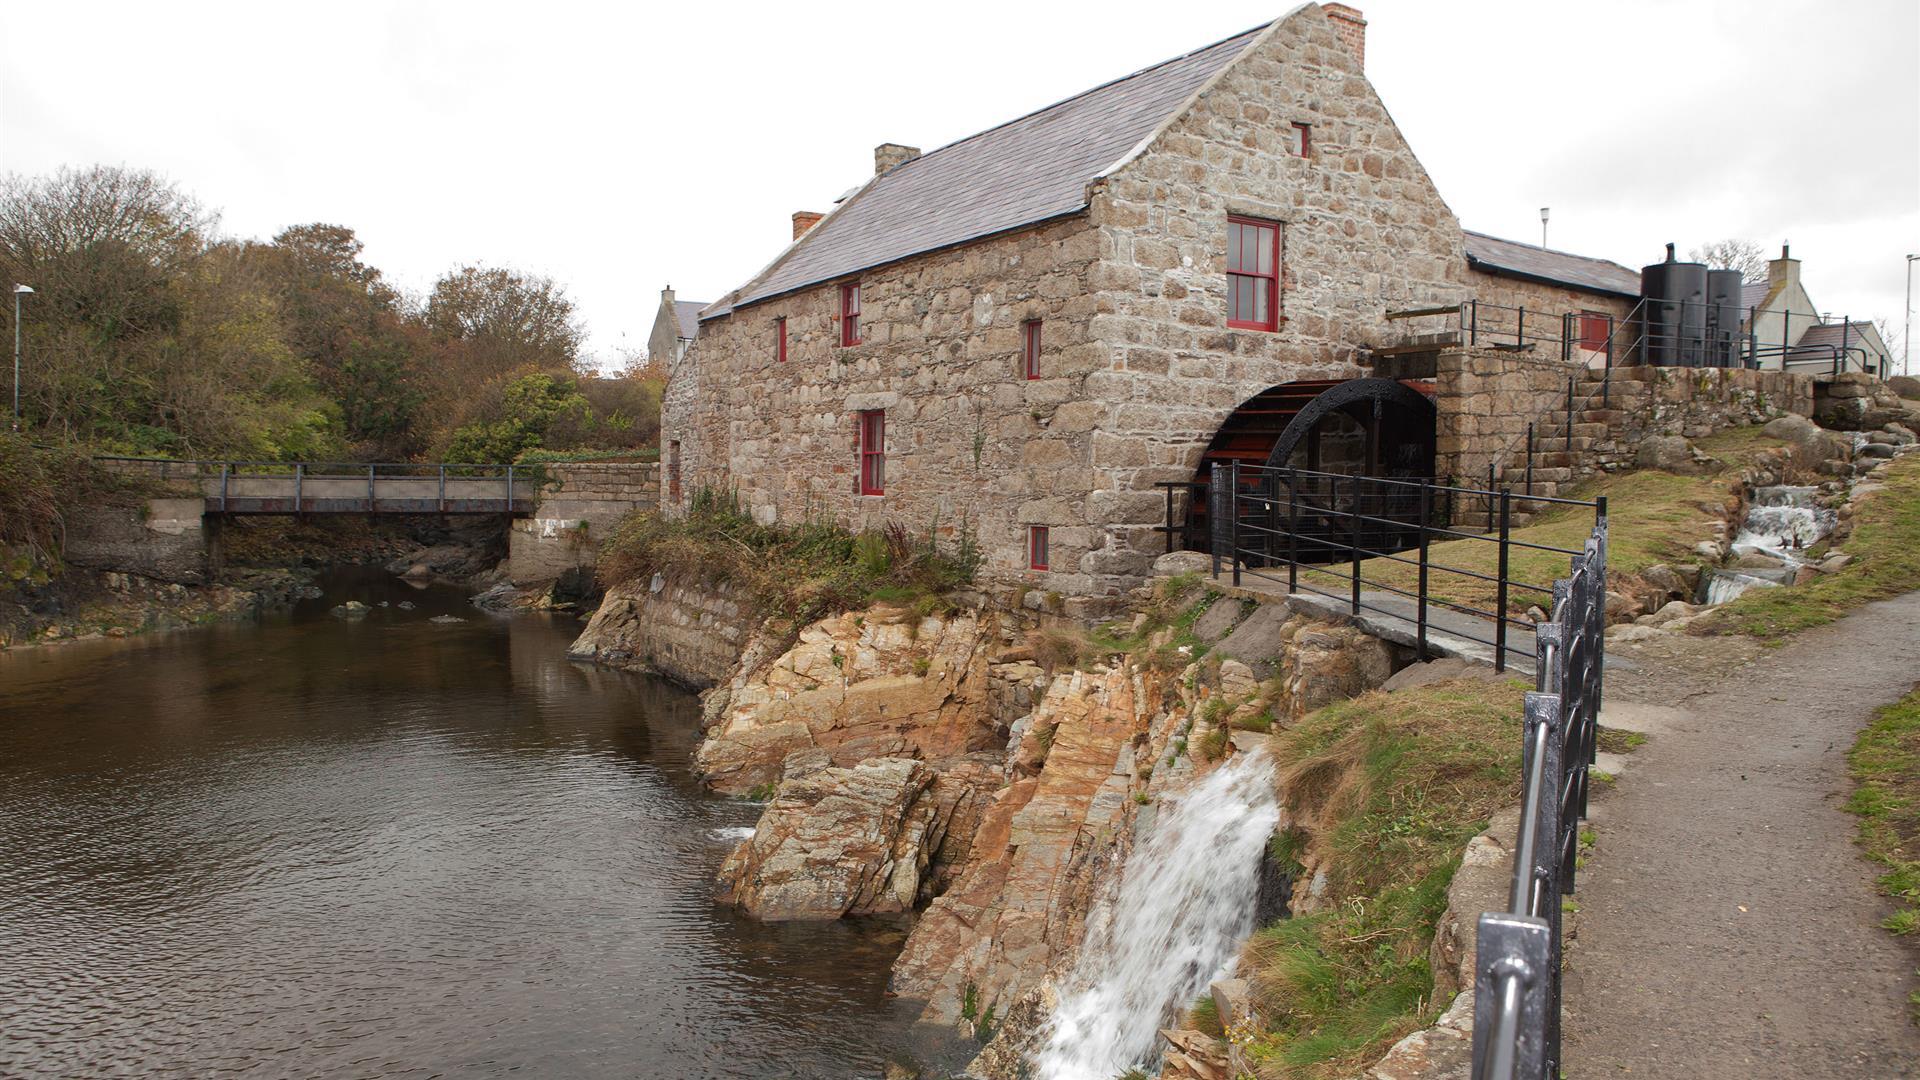 Pictured is Annalong Cornmill which has been beautifully restored. It is situated by the pretty Annalong Harbour, near the foothills of the Mourne Mou